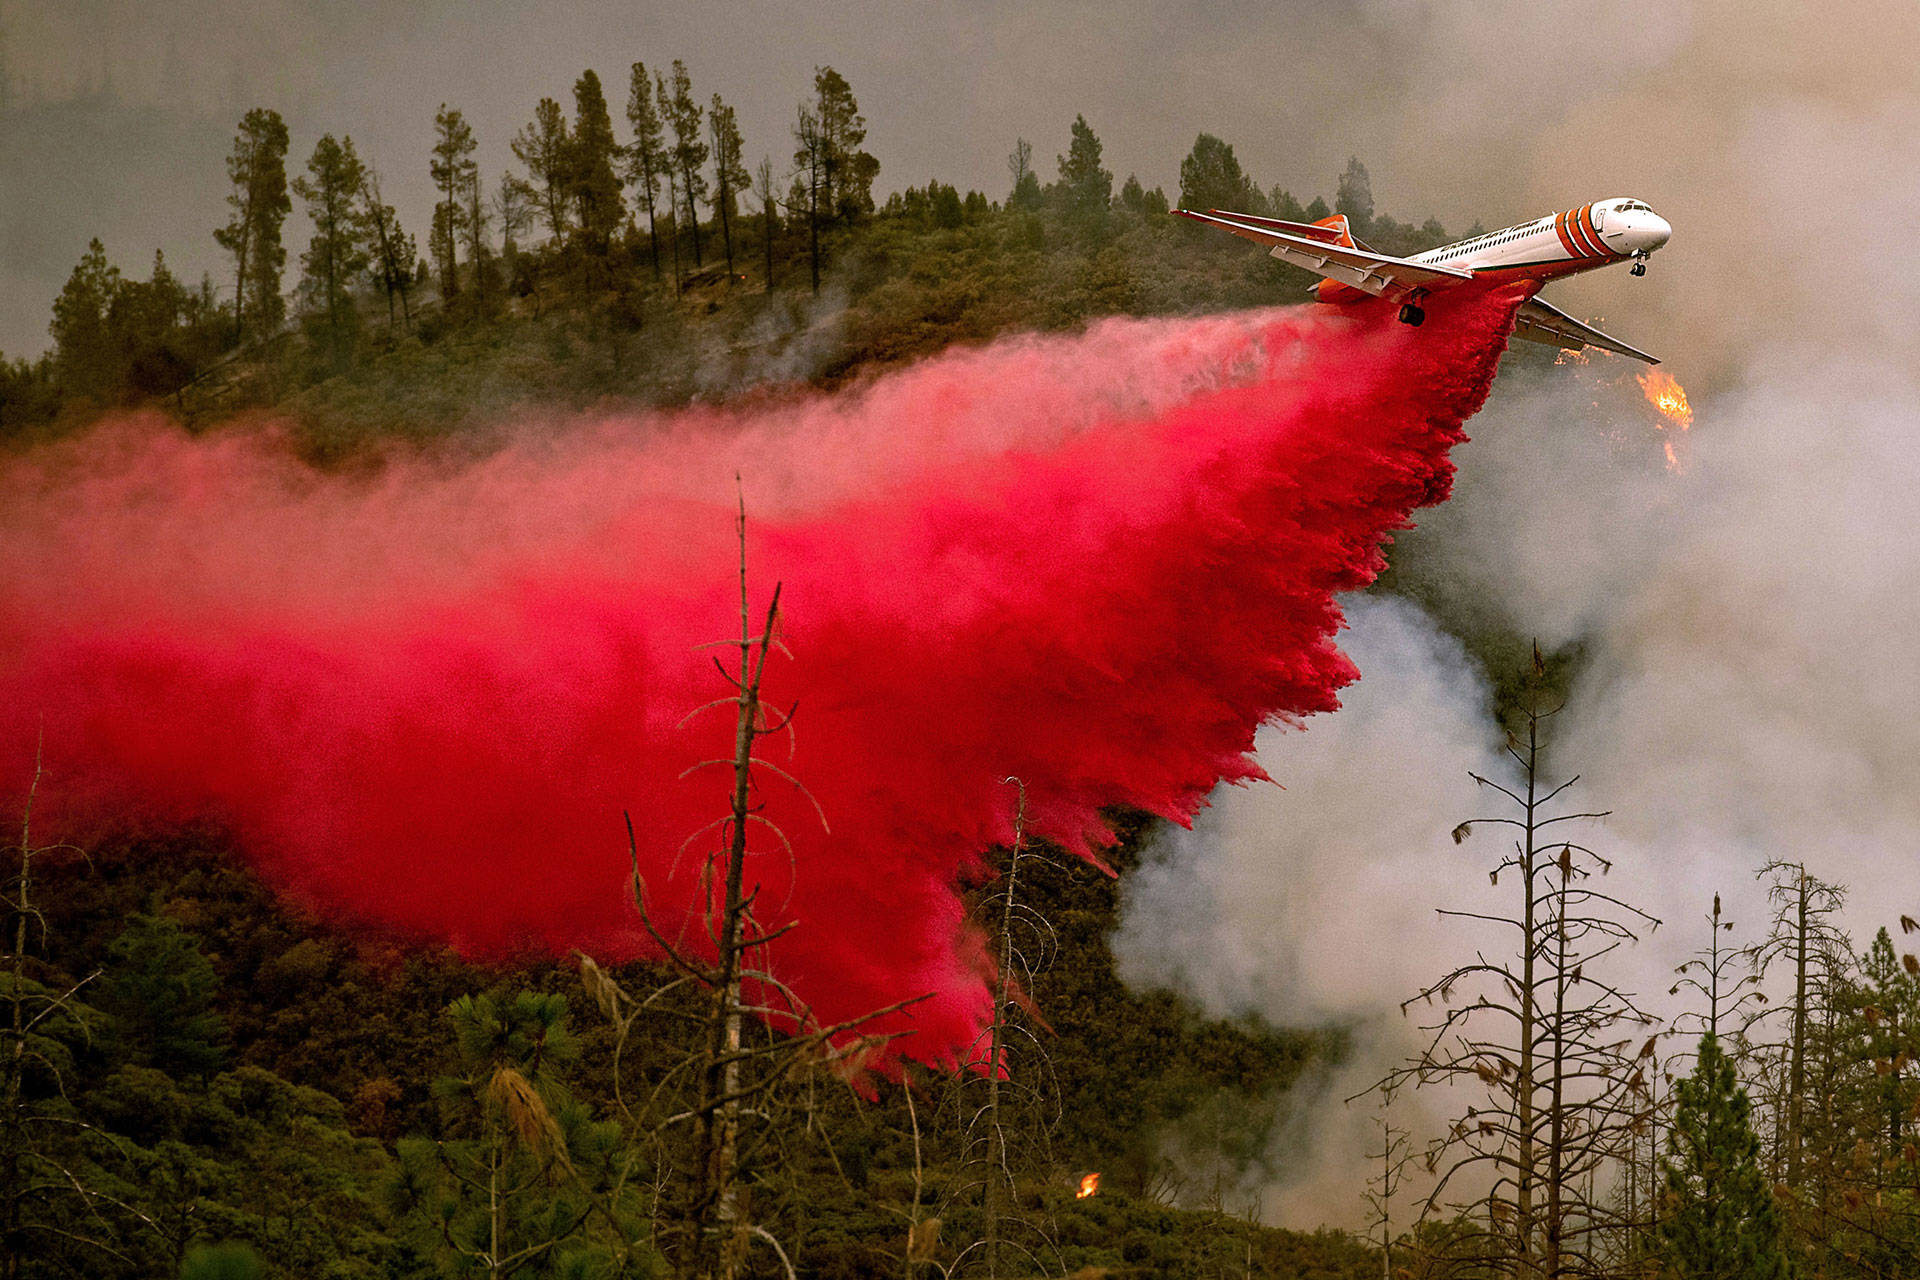 An air tanker drops retardant while battling the Ferguson Fire near Yosemite National Park on July 21. The fire is now burning within the park boundary. NOAH BERGER/AFP/Getty Images